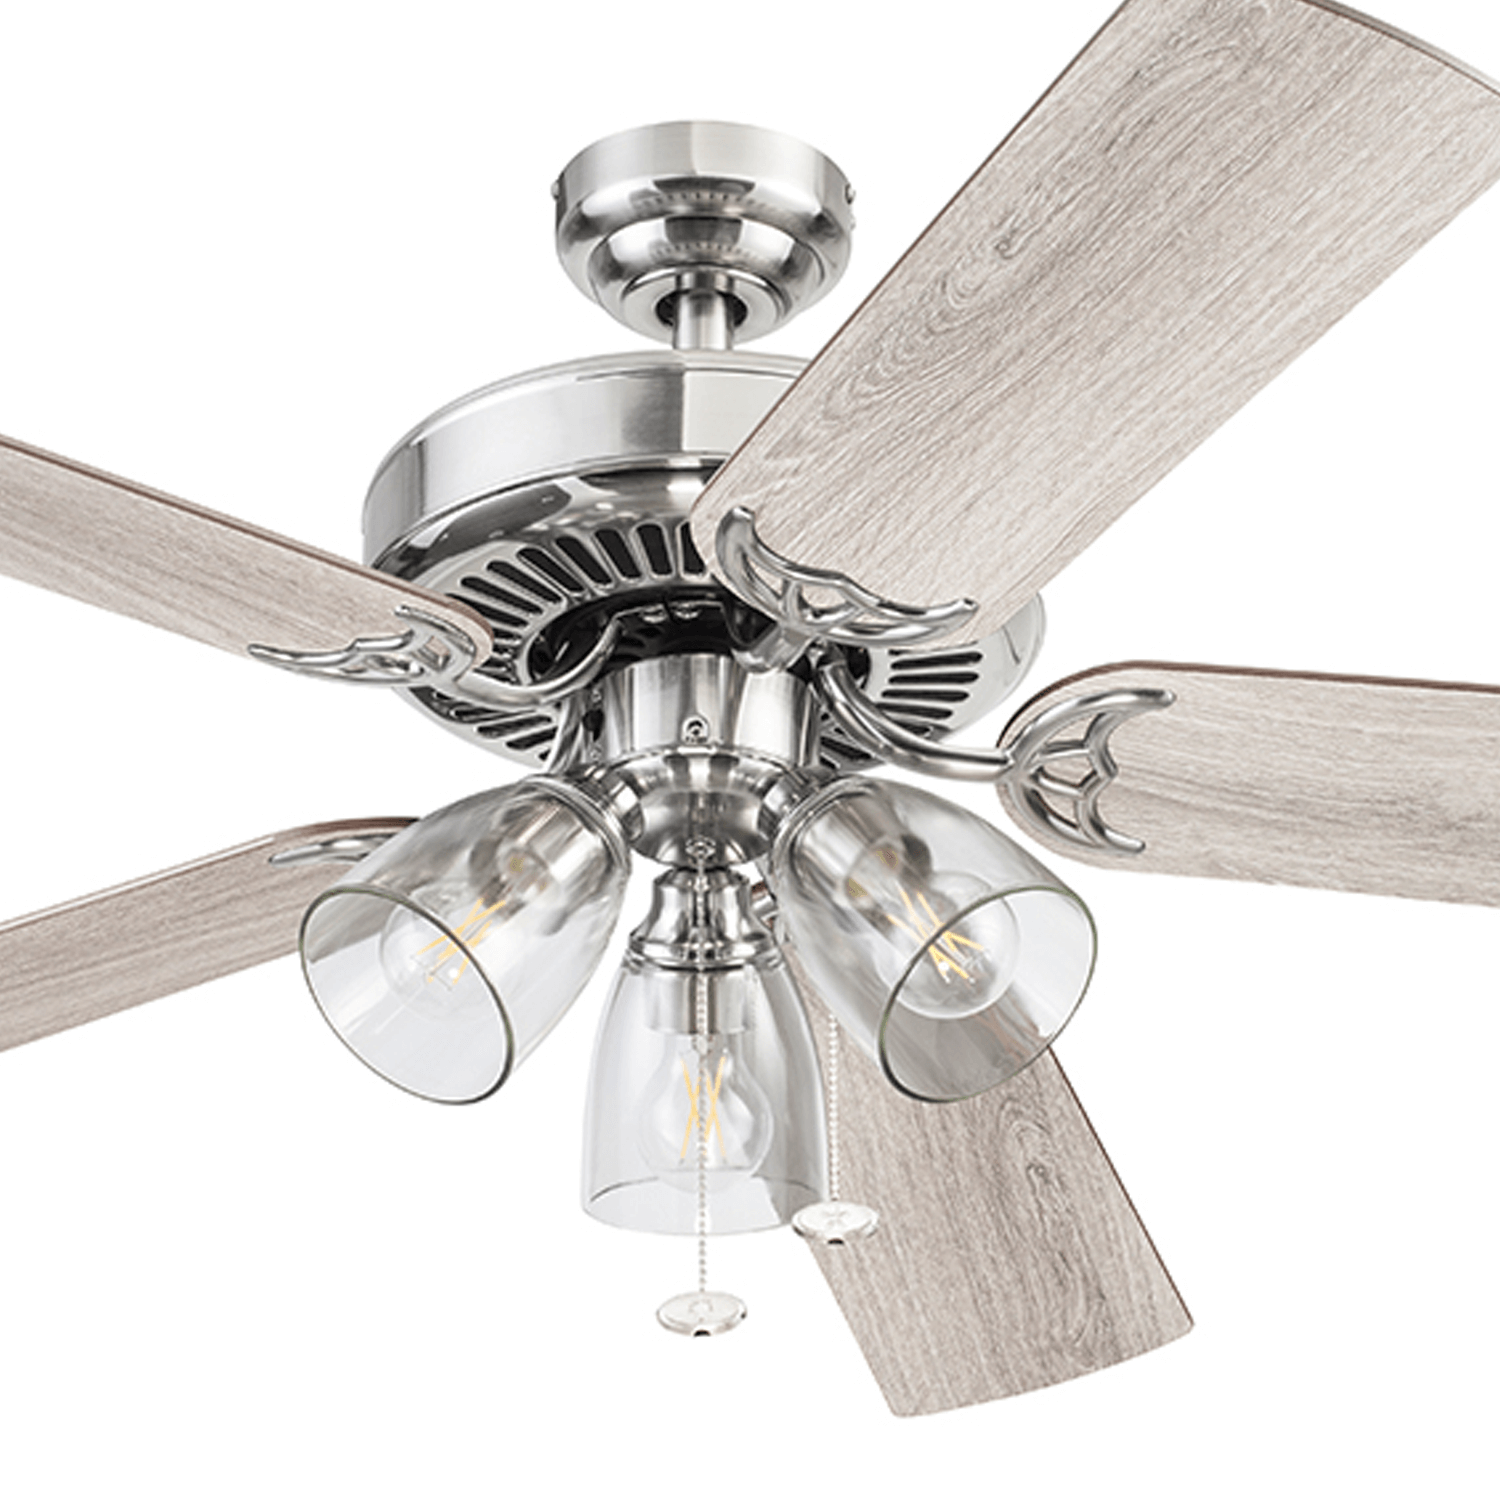 52 Inch Saybrook, Satin Nickel, Pull Chain, Ceiling Fan by Prominence Home